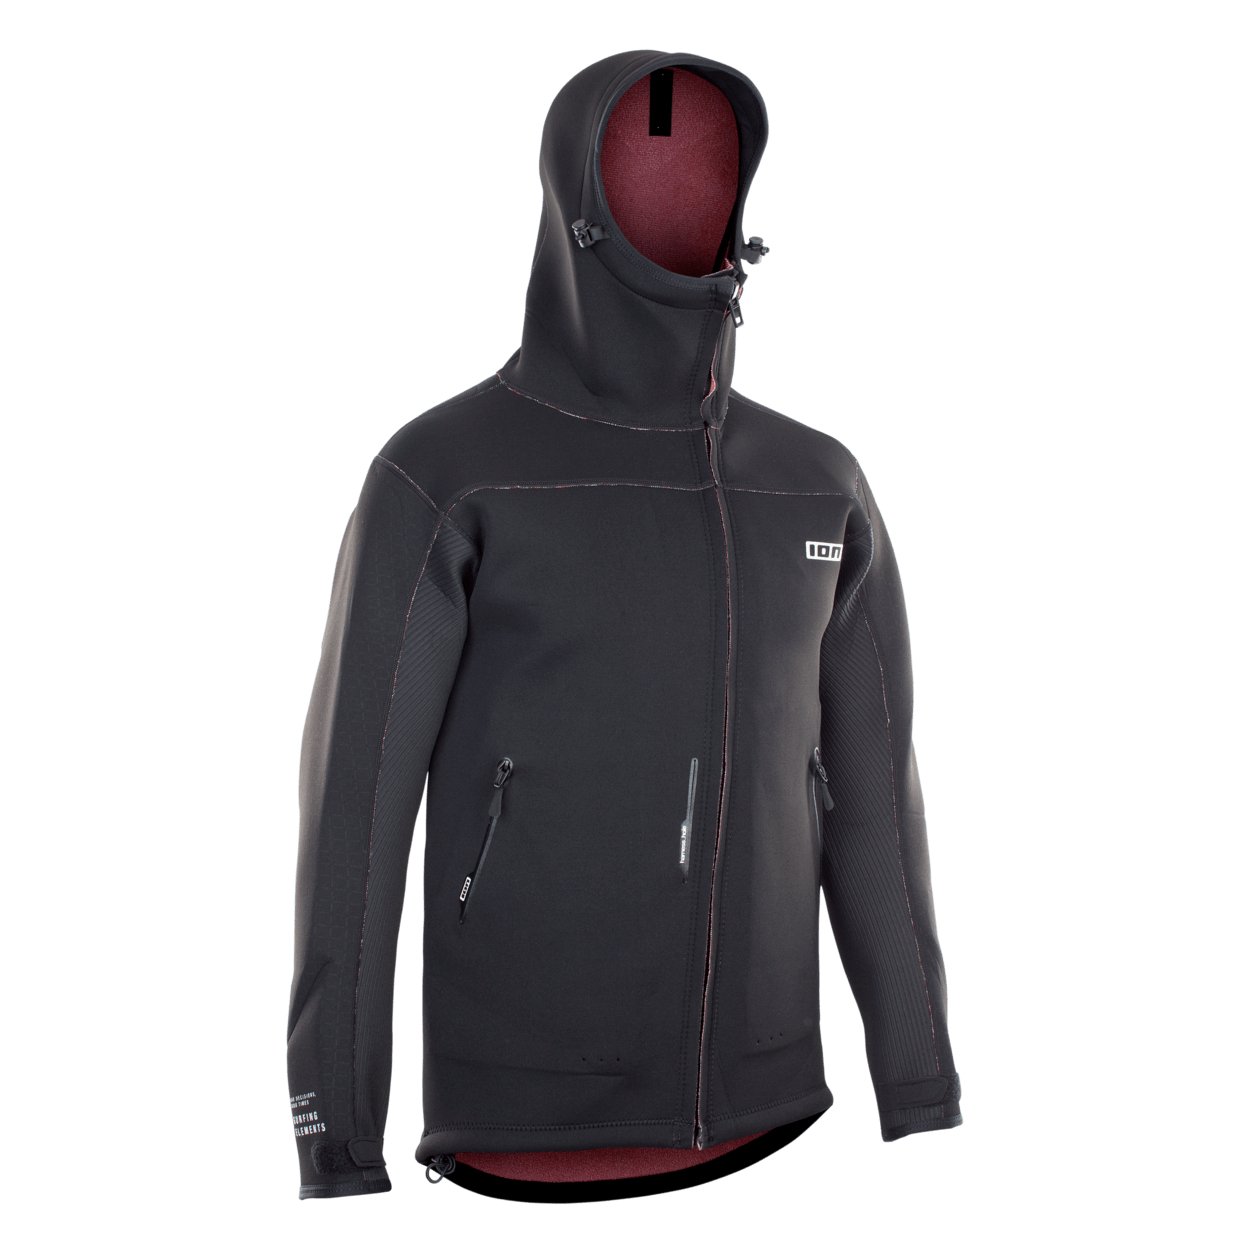 ION Neo Shelter Jacket Amp 2021 - Worthing Watersports - 9008415991457 - Tops - ION Water